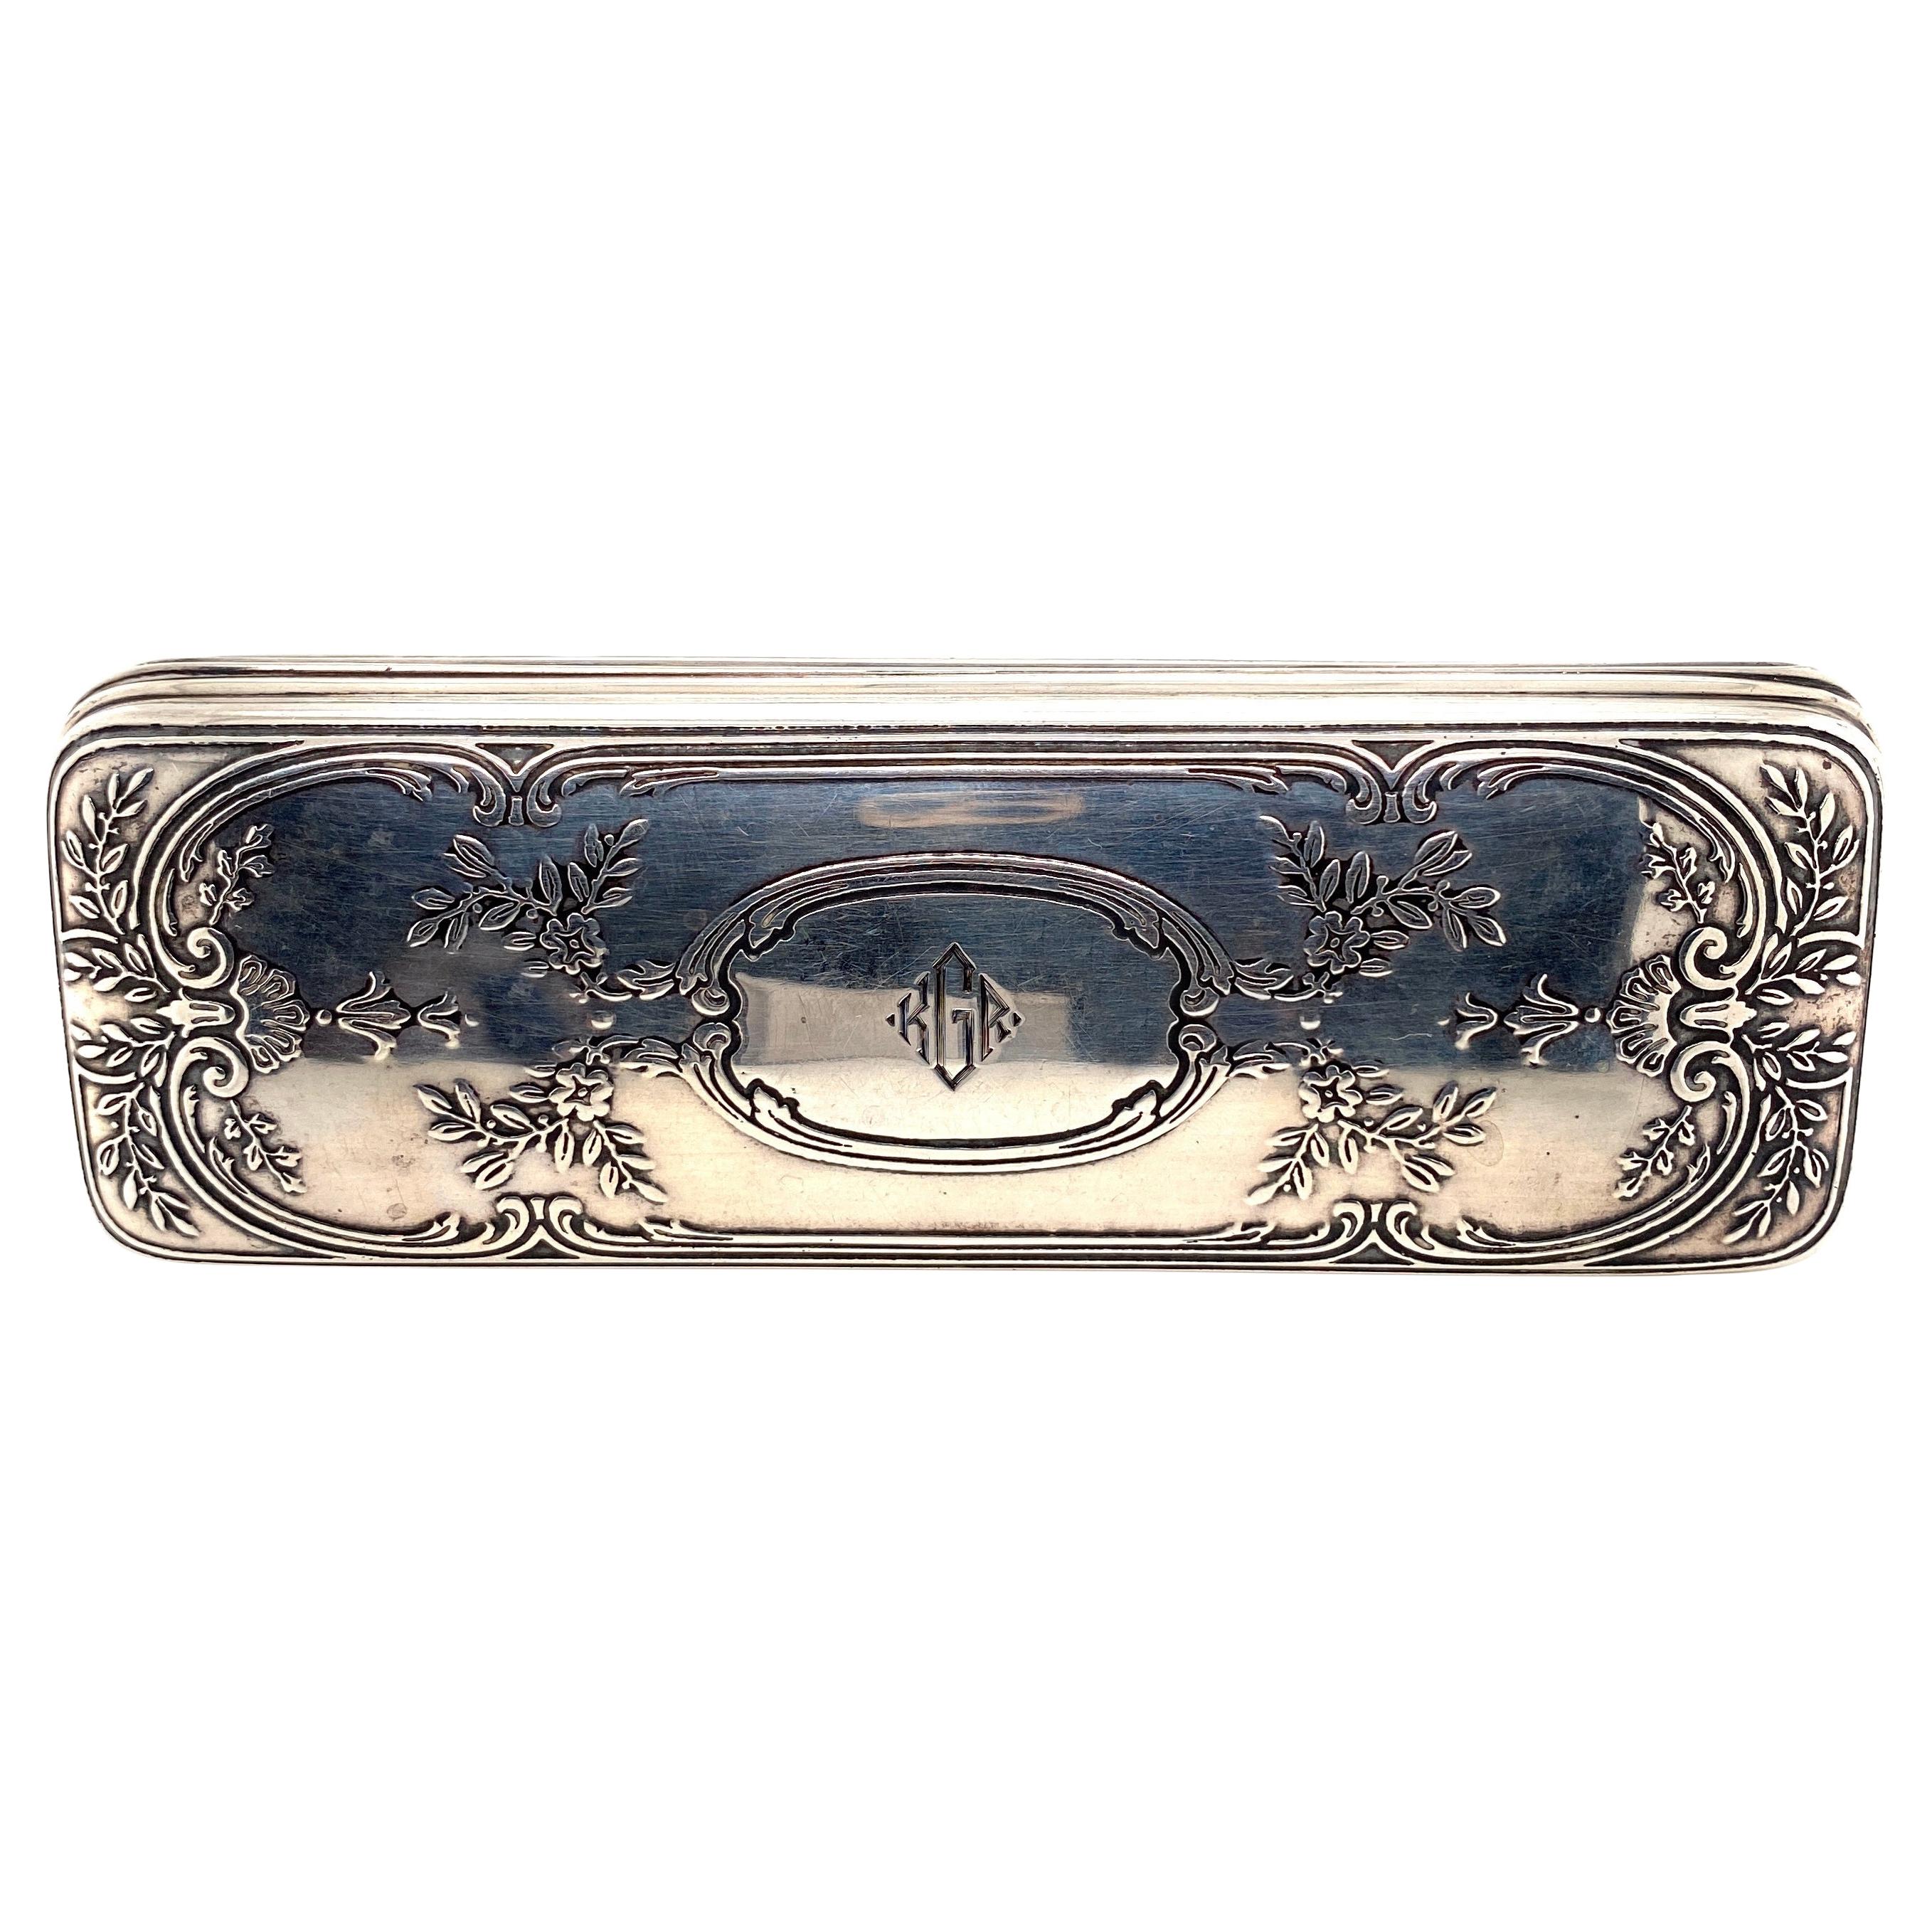 Tiffany & Co. Sterling Silver 925 Edwardian Engraved Box Estate Find, Circa 1900 For Sale